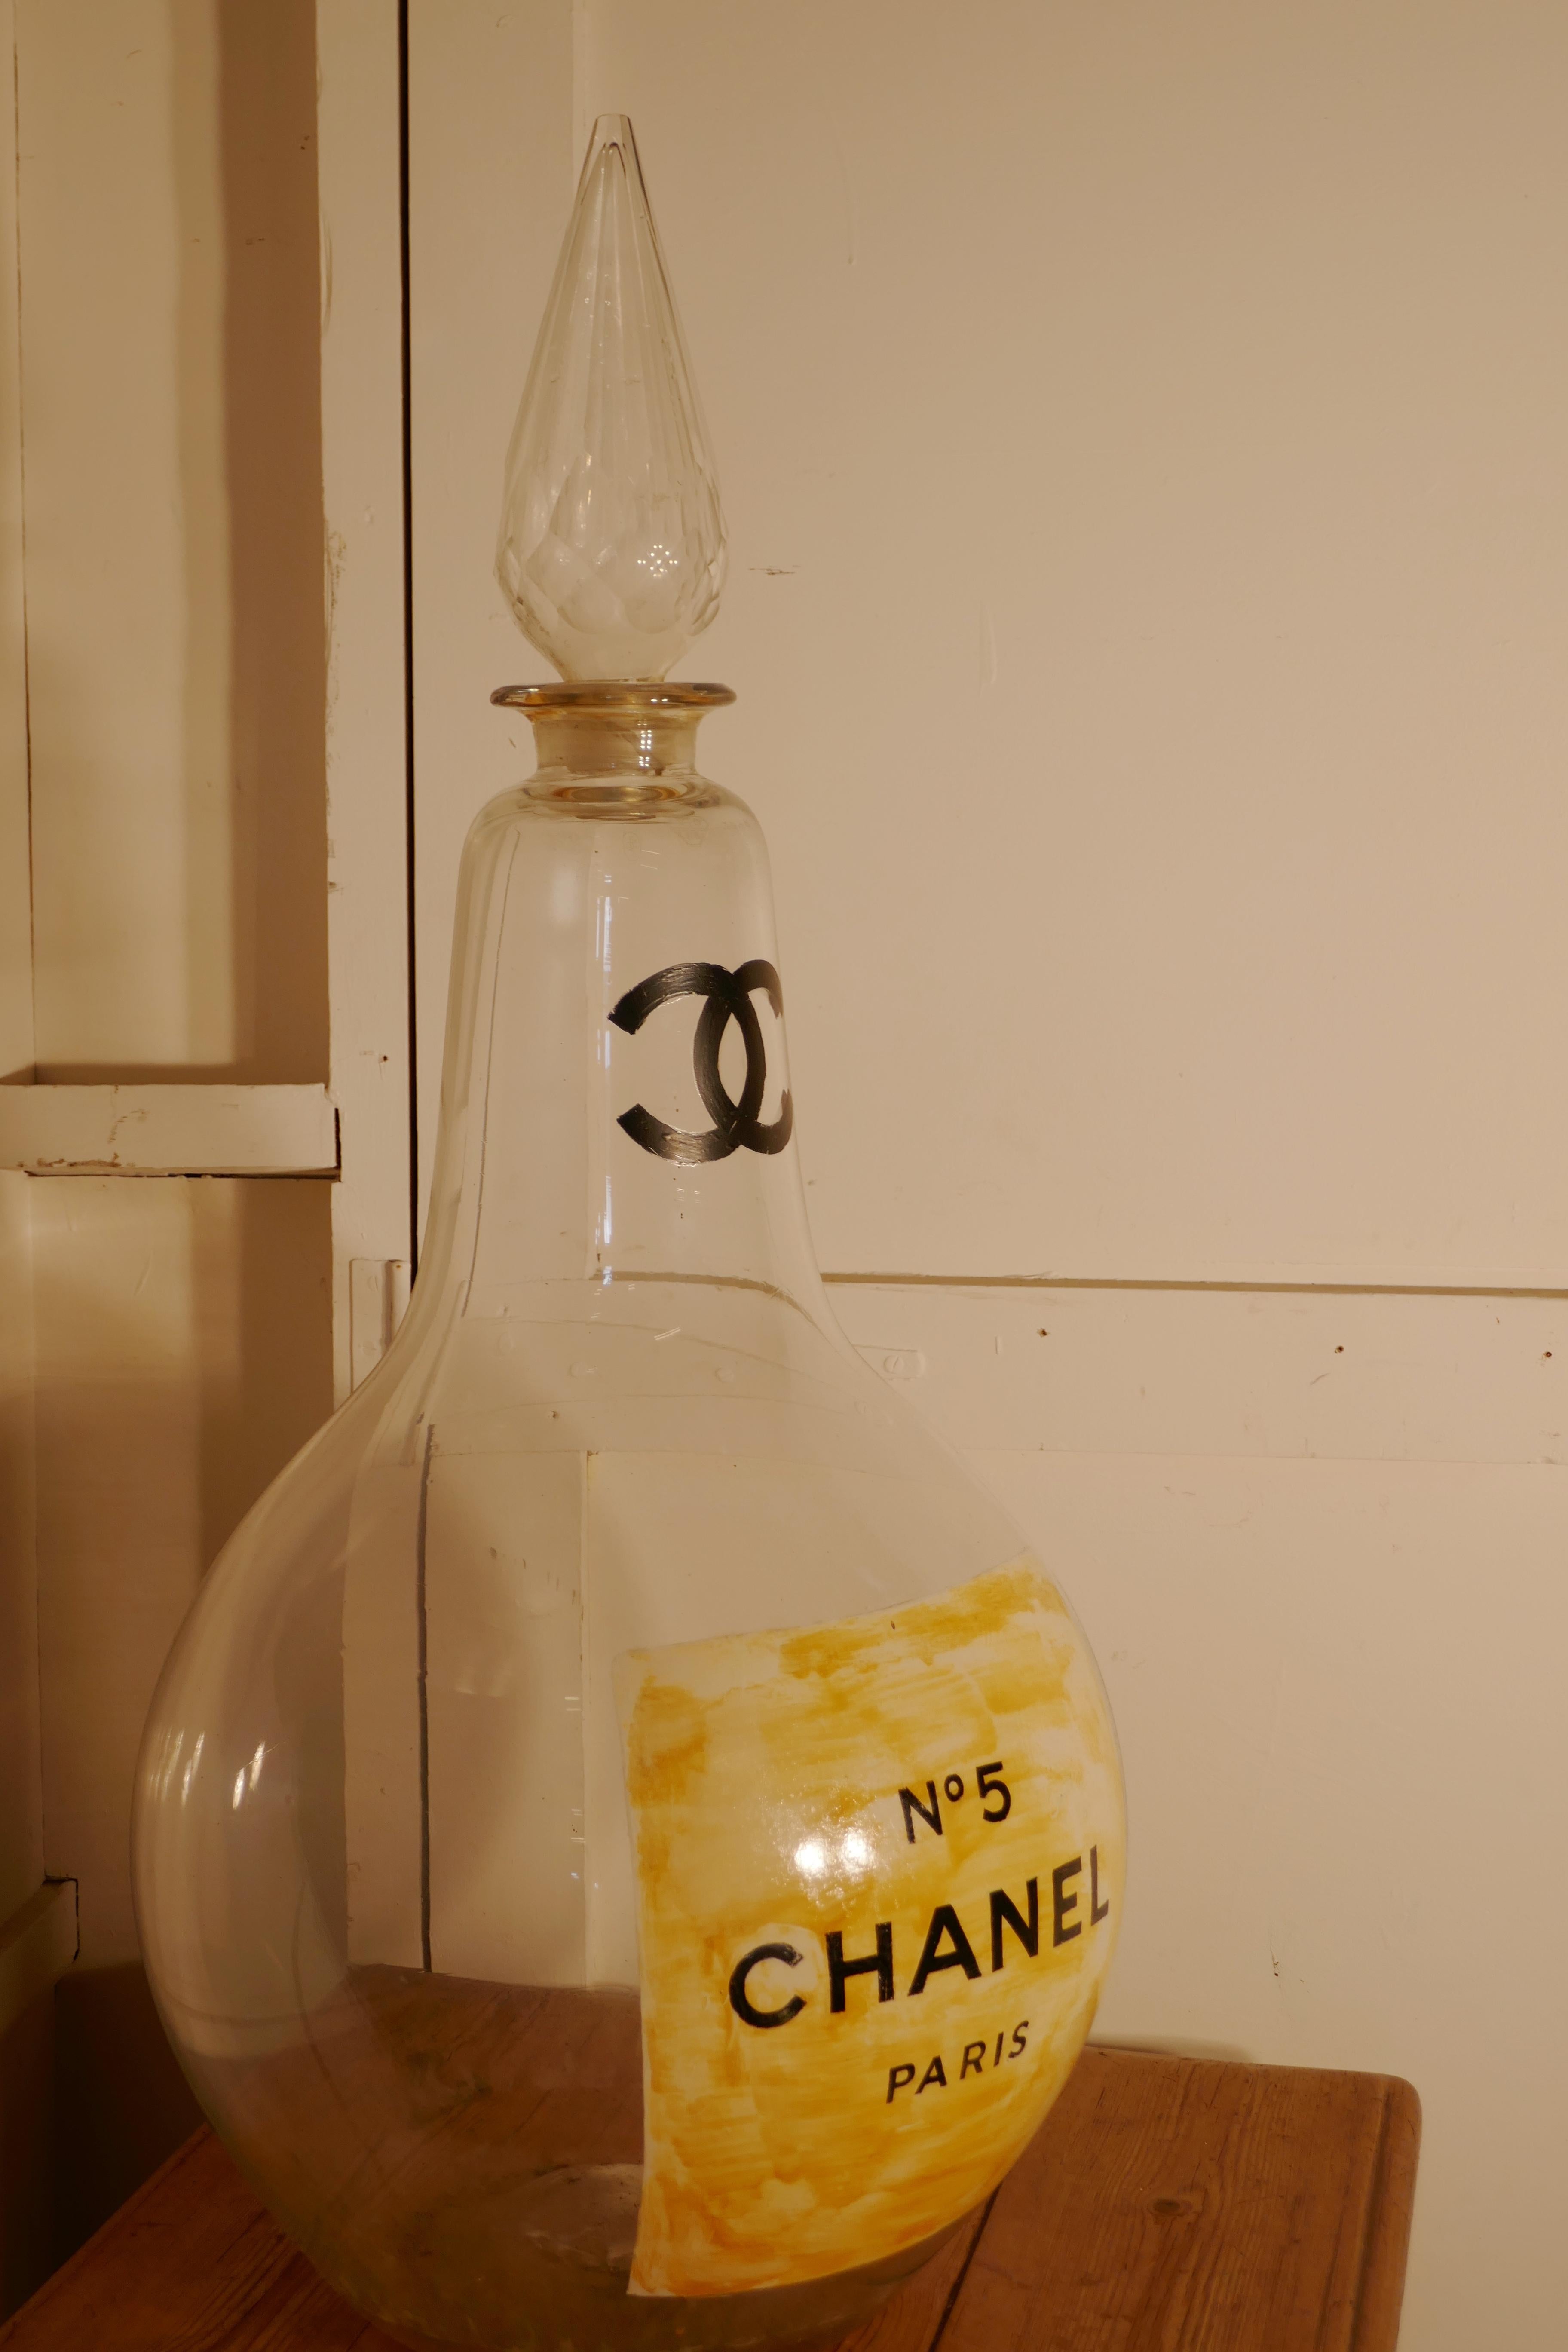 Very Large Perfume Bottle CHANEL No5 Paris

This is a very large Glass bottle with a very large faceted stopper, in this case it is advertising CHANEL No5, it was painted for an exhibition display, and from there it has been used in a perfumery 
The